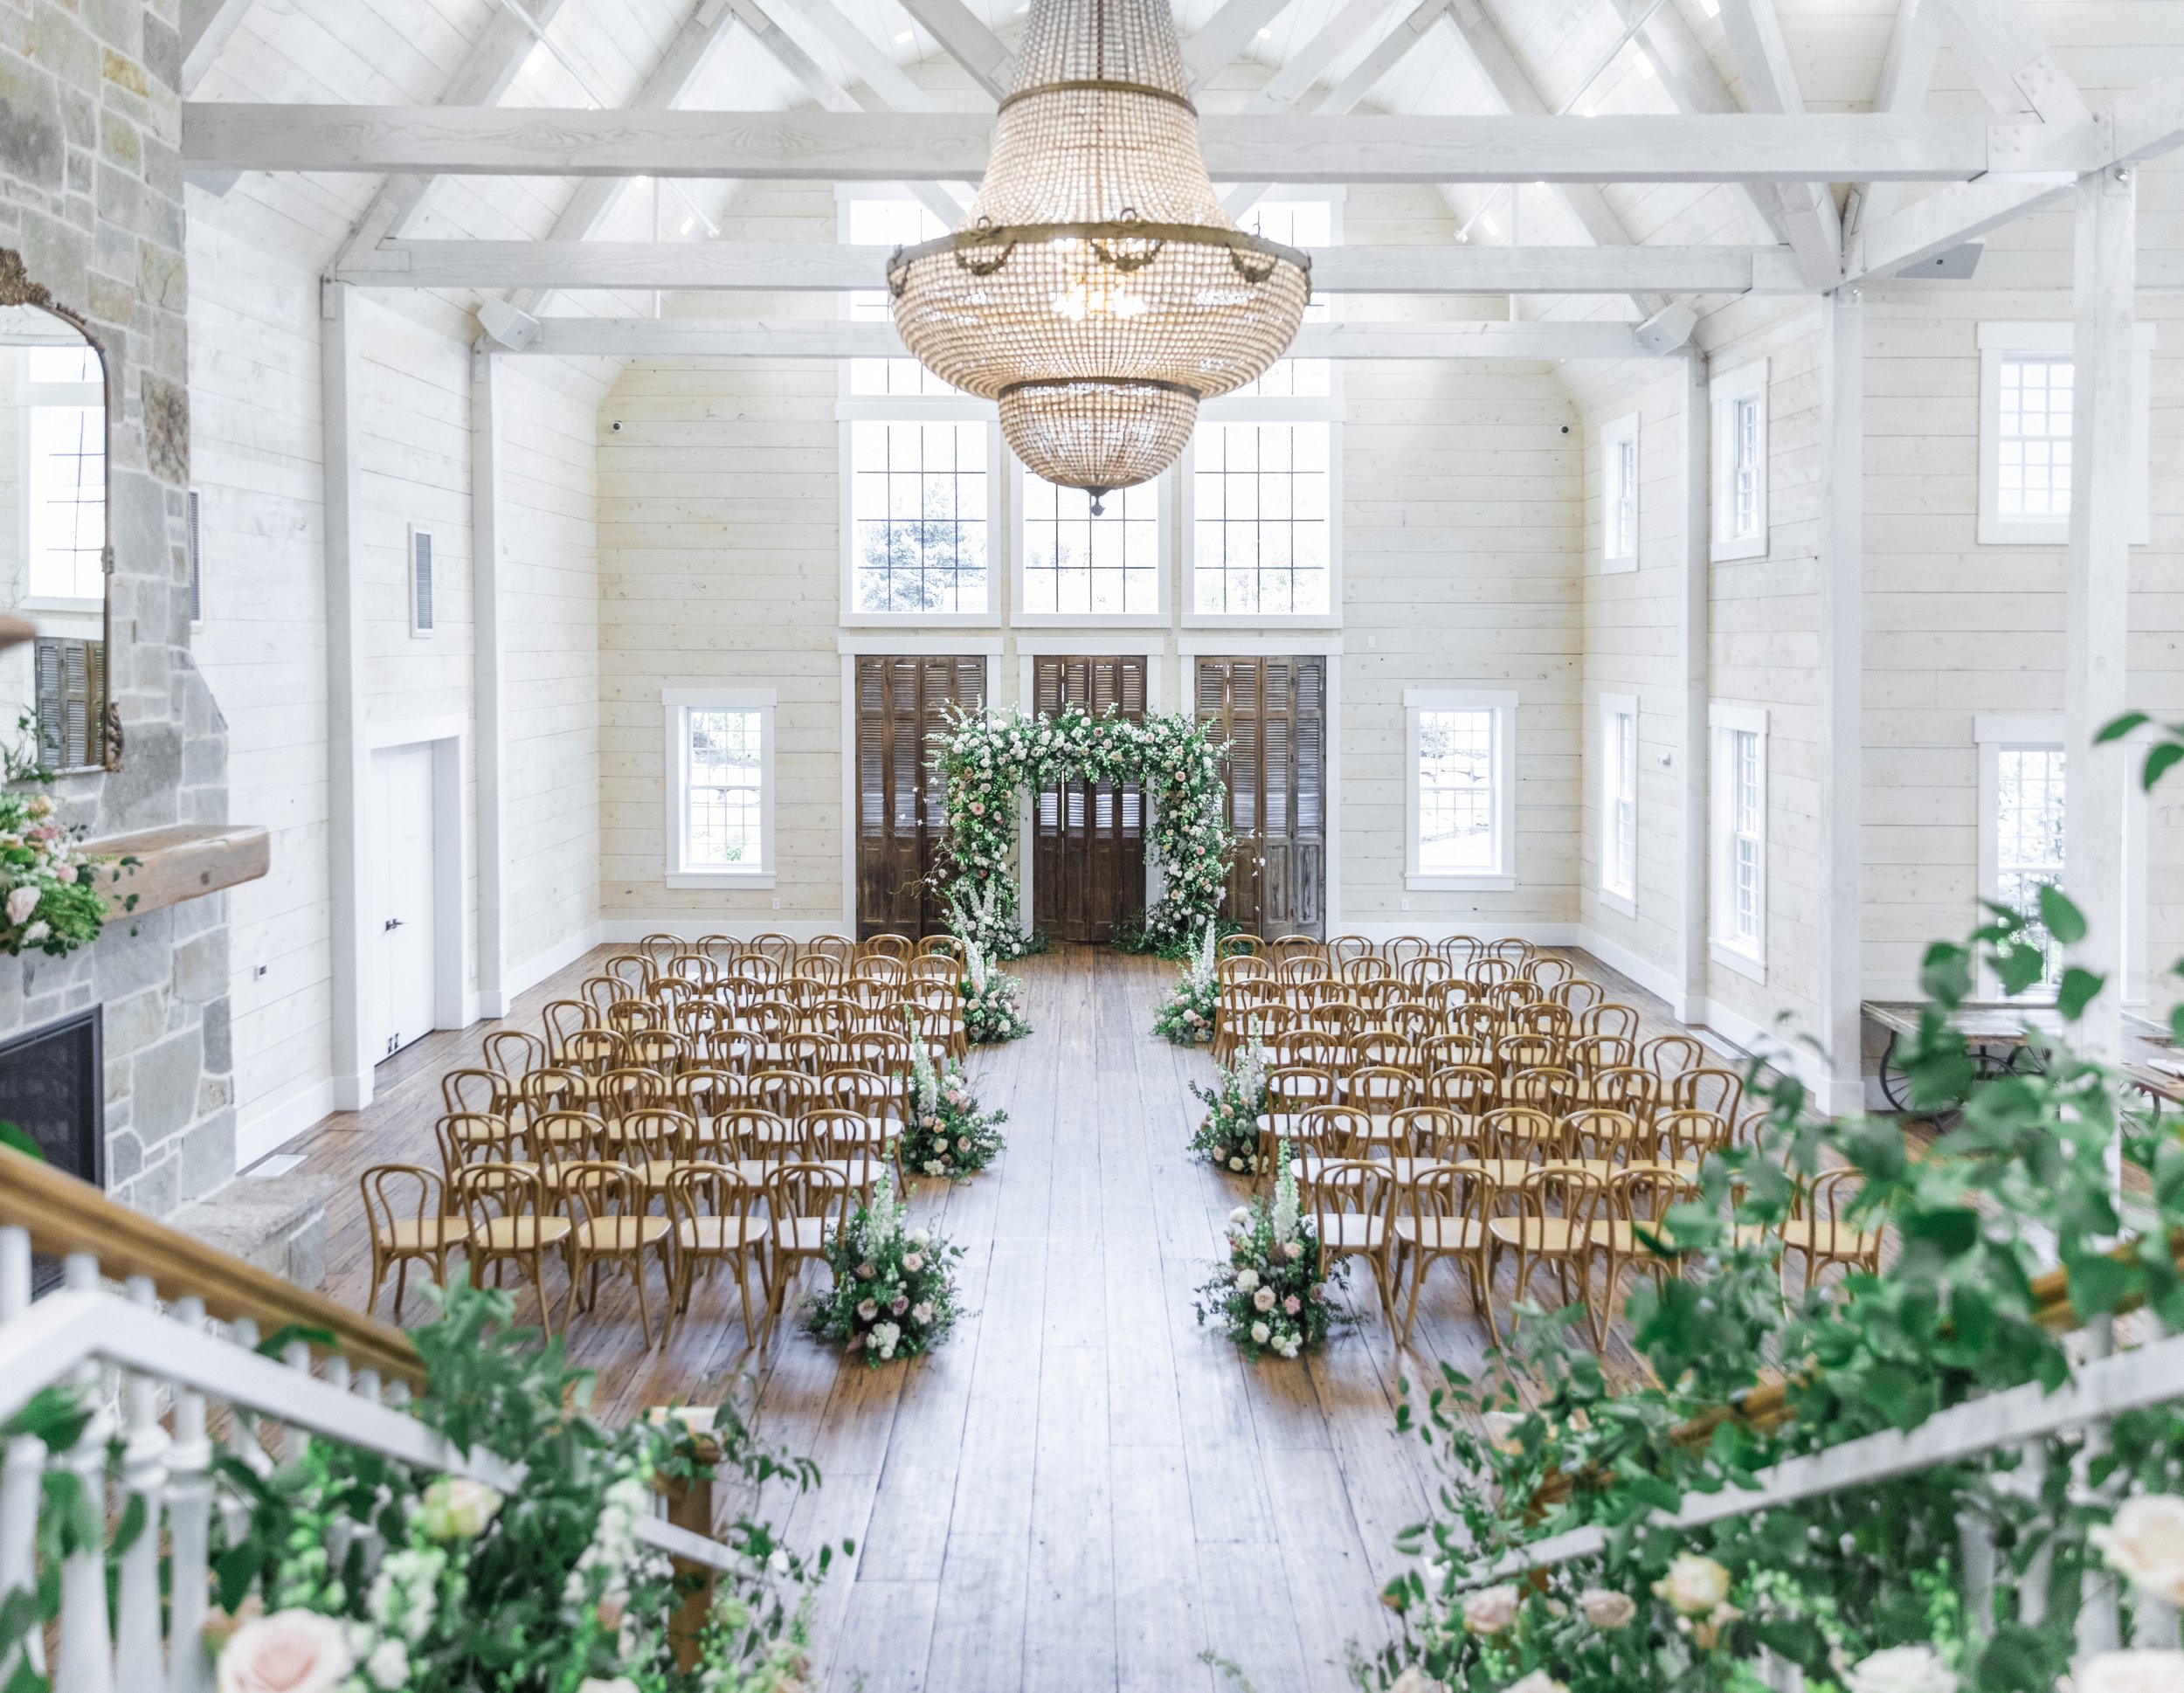  An indoor Utah wedding venue with rustic chairs and fresh greenery captured by Savanna Richardson Photography. Utah wedding venues fresh florals #savannarichardsonphotography #utahvendor #utahweddingphotographer #MilleFleurDesign #Utahweddingdesigns